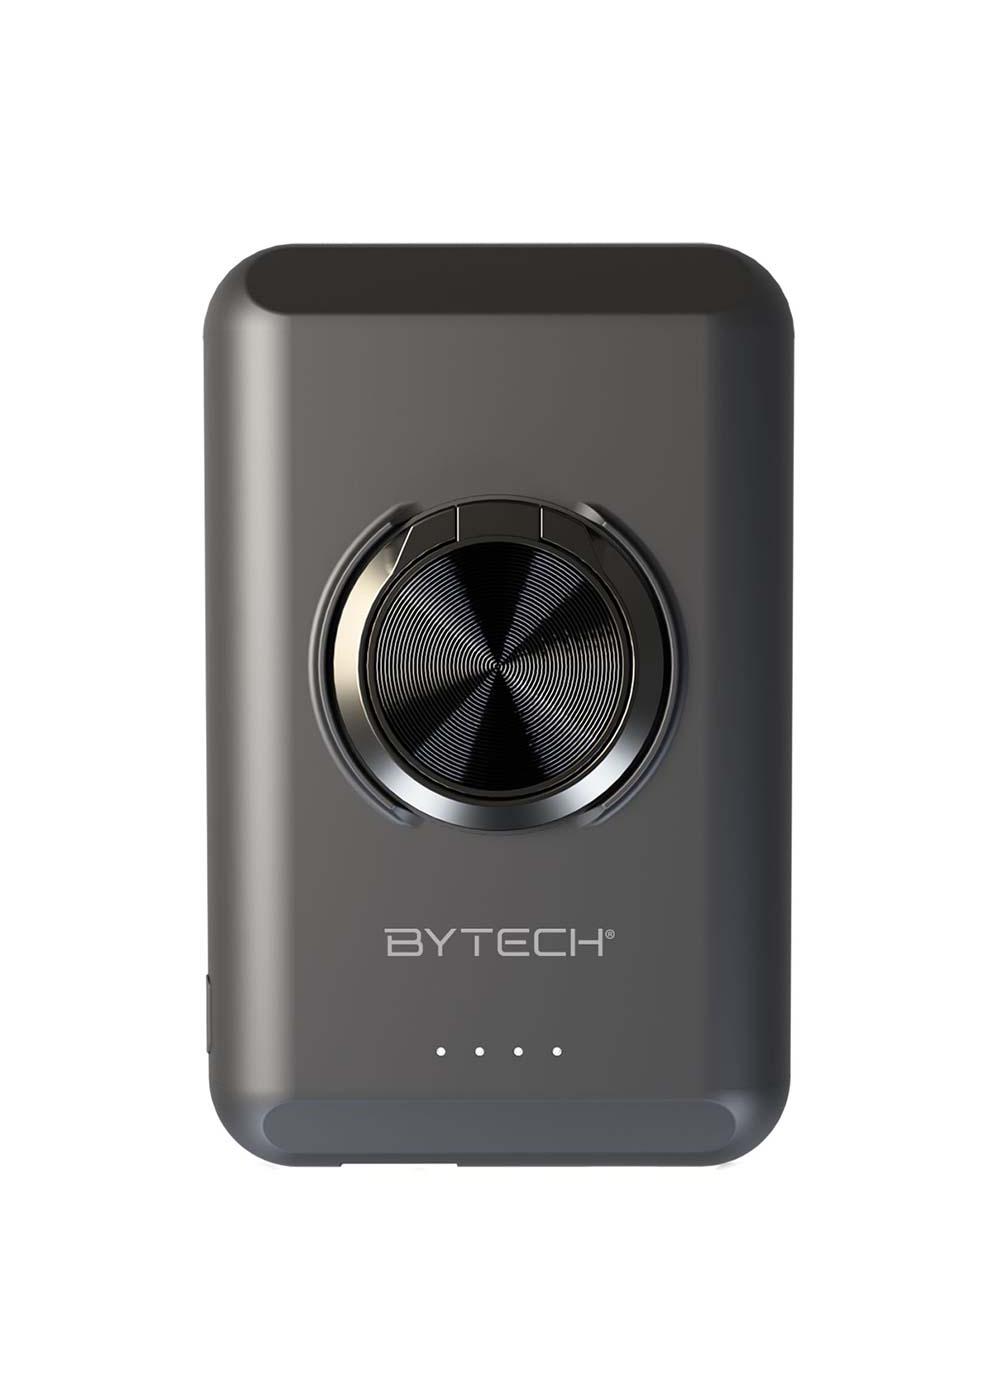 Bytech Magnetic Slim Power Bank with Ring Stand - Black; image 2 of 2